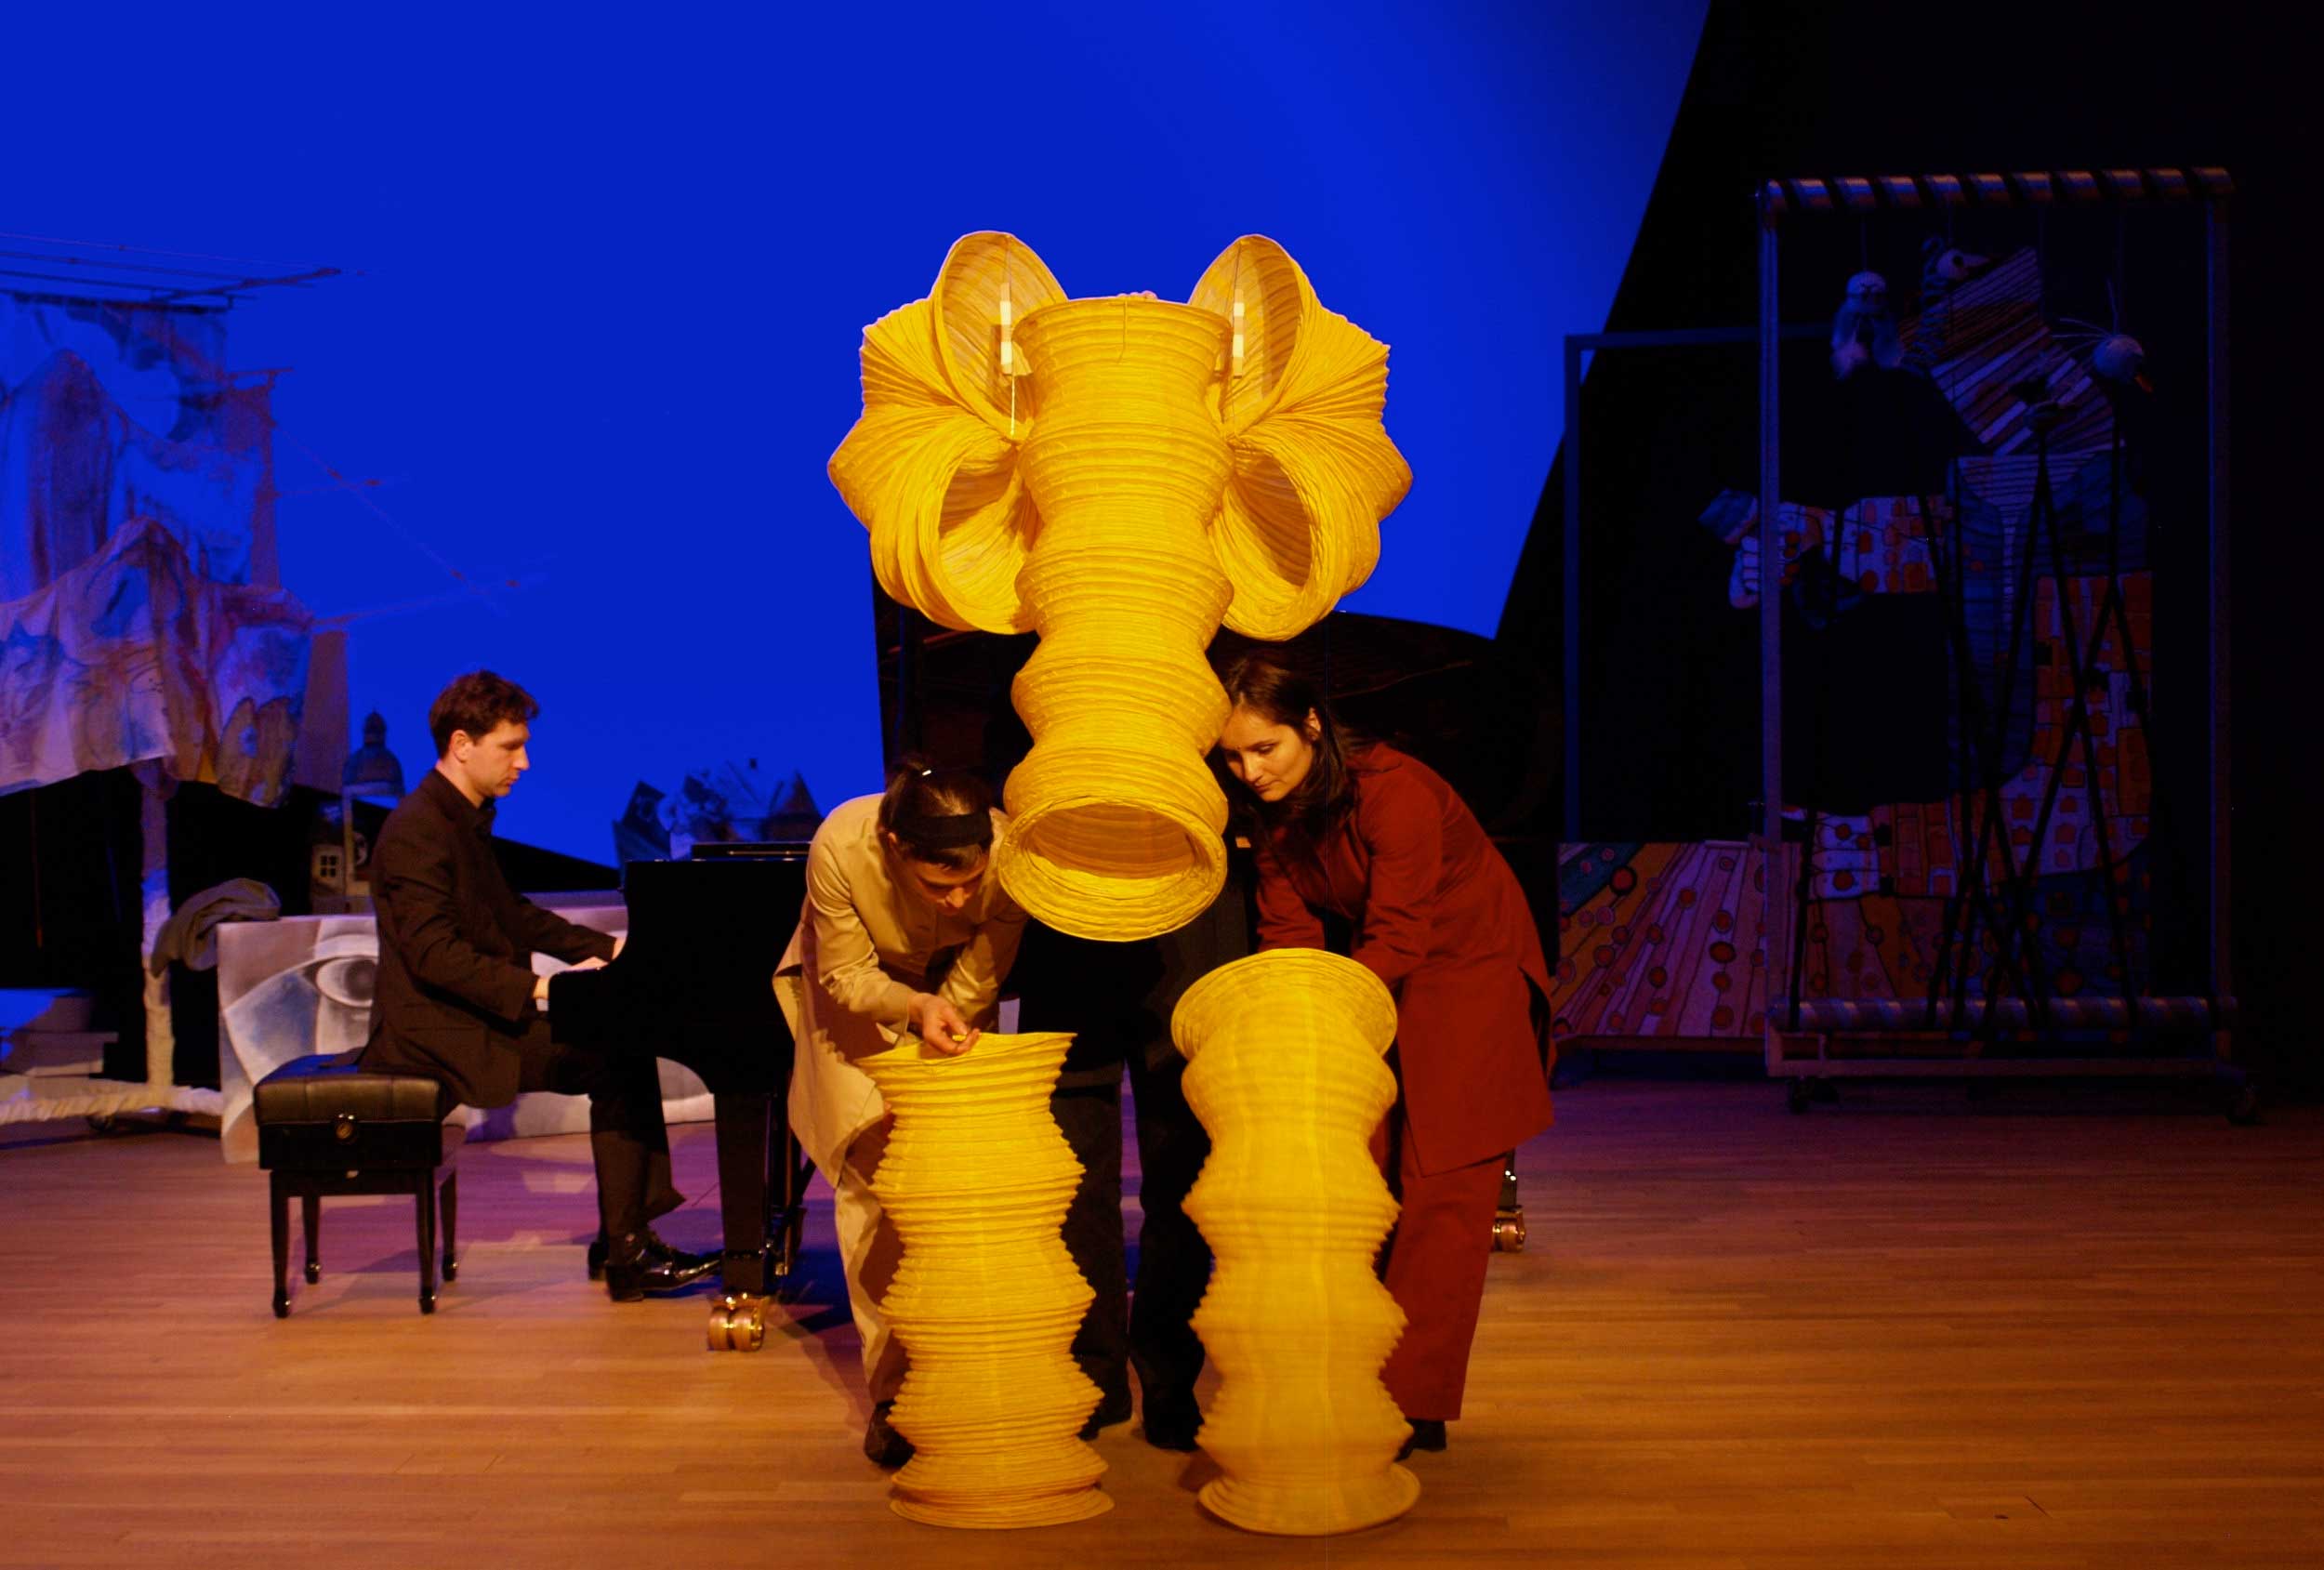 modest-mussorgsky-pictures-at-an-exhibition-visual-theatre-figurentheater-piano-elefant.jpg